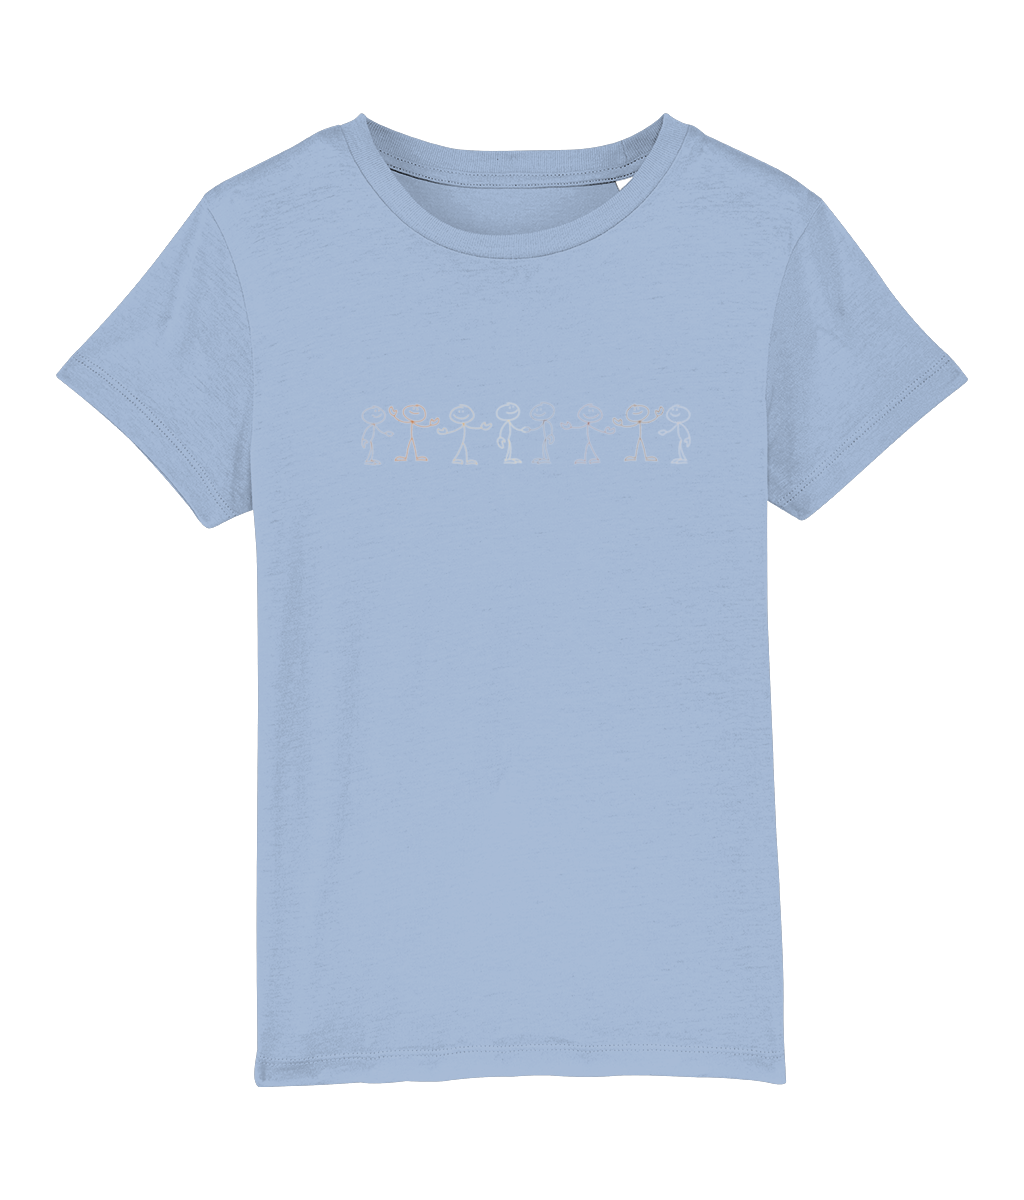 Be Friends Boys Organic Cotton T Shirt - Buy any 3 get 10% off